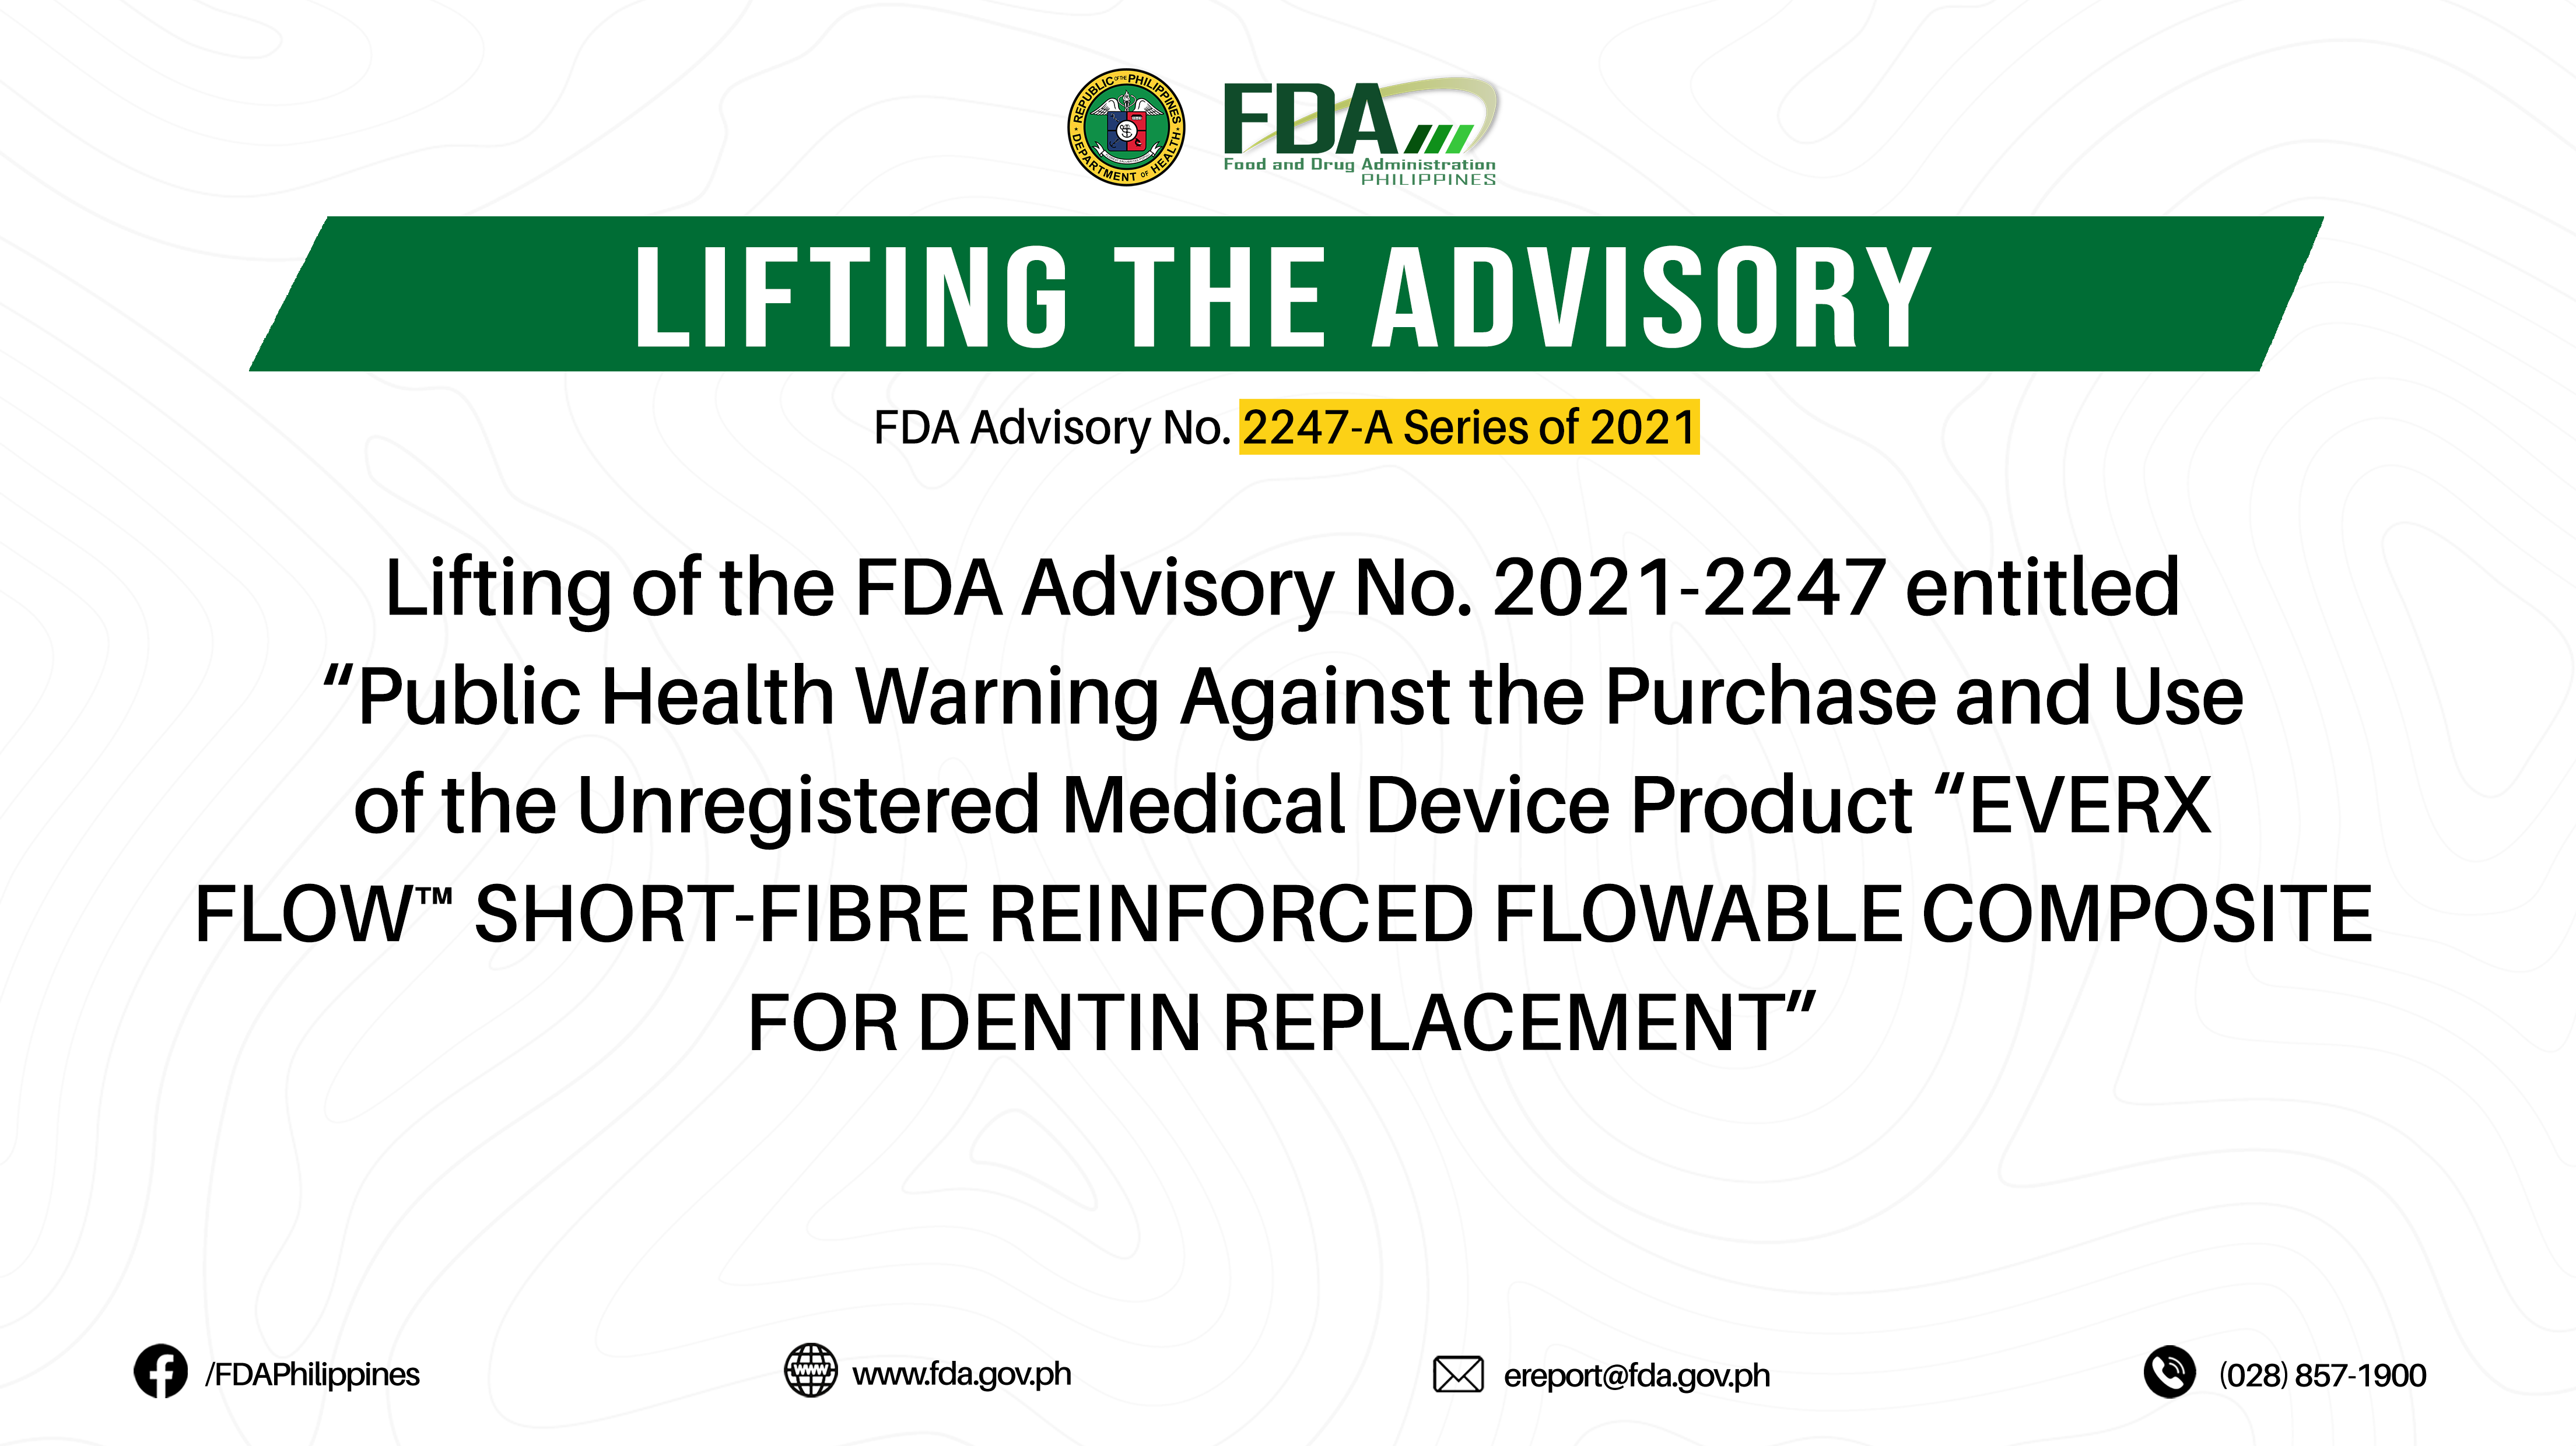 FDA Advisory No.2021-2247-A || Lifting of the FDA Advisory No. 2021-2247 entitled “Public Health Warning Against the Purchase and Use of the Unregistered Medical Device Product “EVERX FLOW™ SHORT-FIBRE REINFORCED FLOWABLE COMPOSITE FOR DENTIN REPLACEMENT”